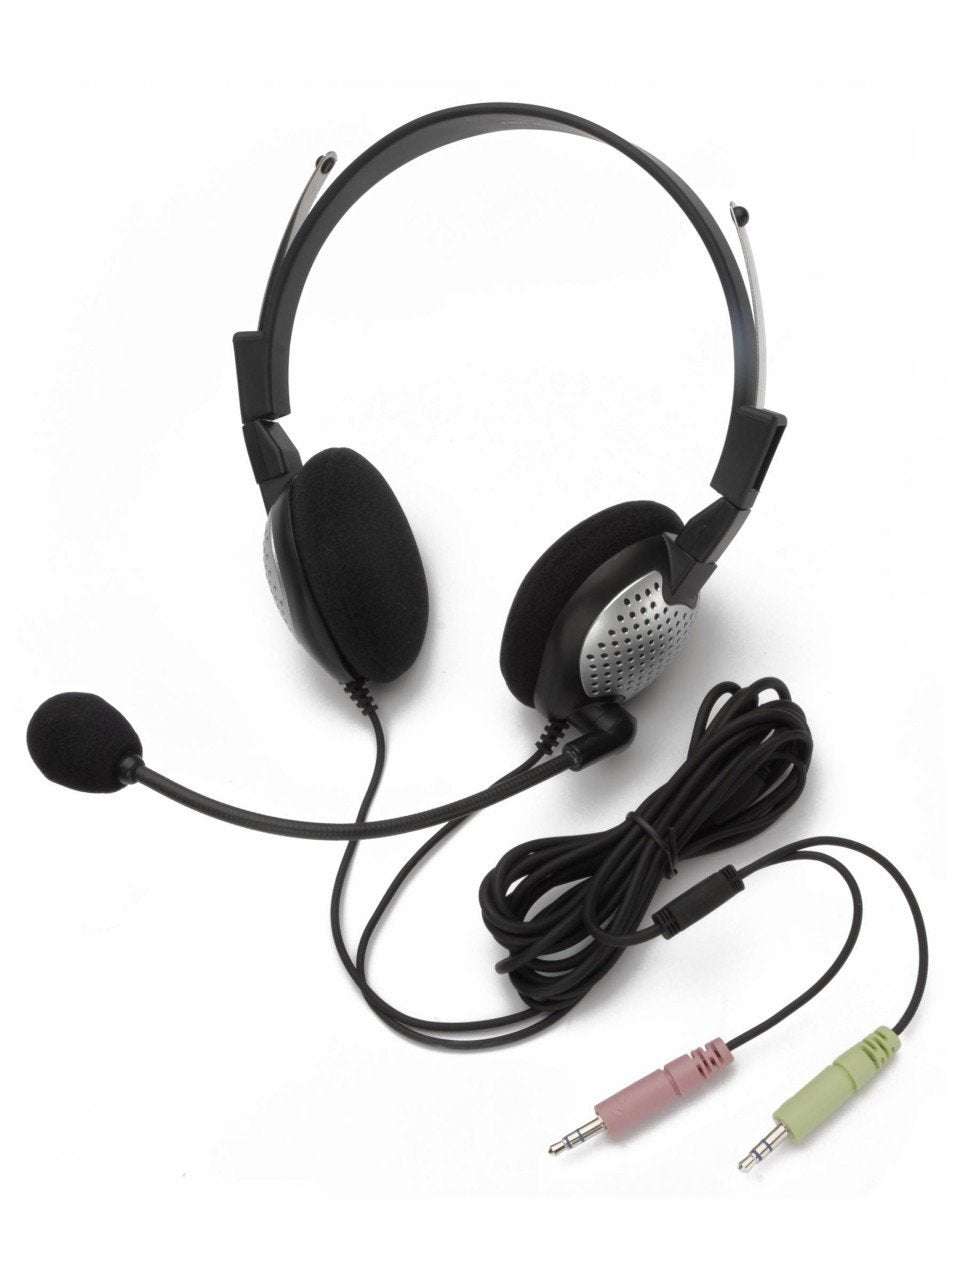  [AUSTRALIA] - Andrea Electronics NC-185 High Fidelity Stereo PC Headset with Noise Canceling Microphone (C1-1022400-1)